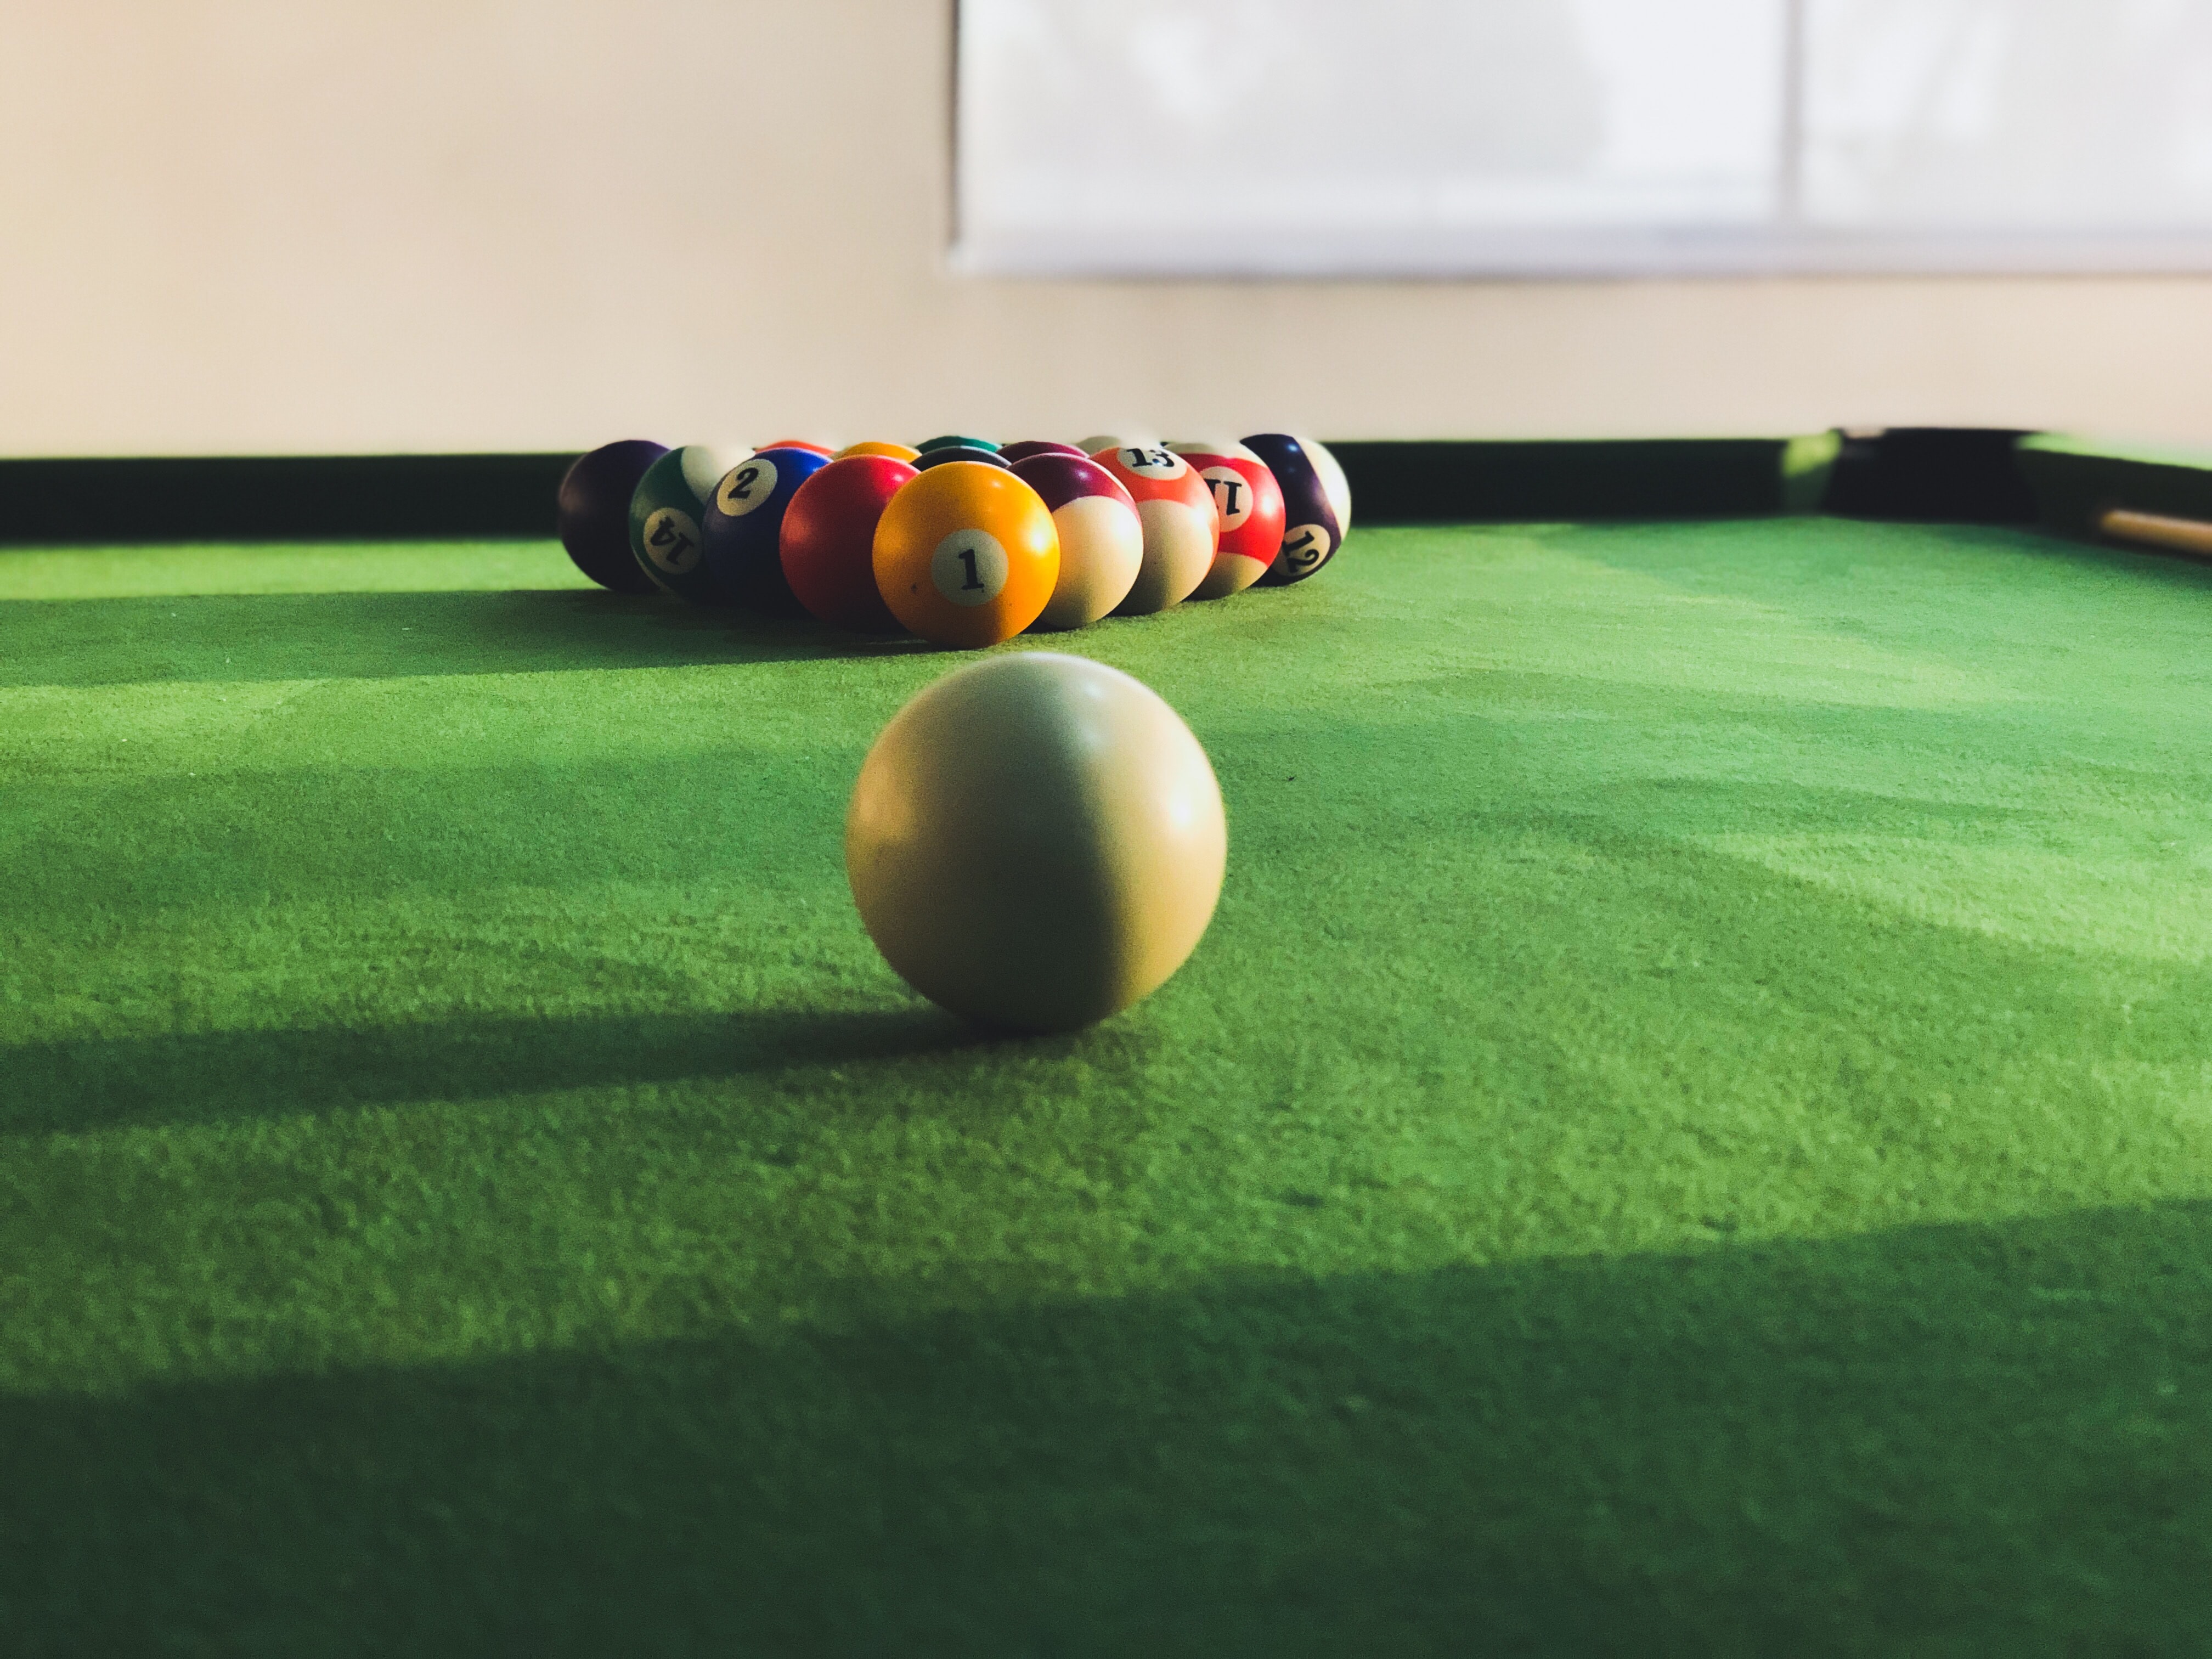 white cue ball in front of racked pool balls on a green felt cloth.